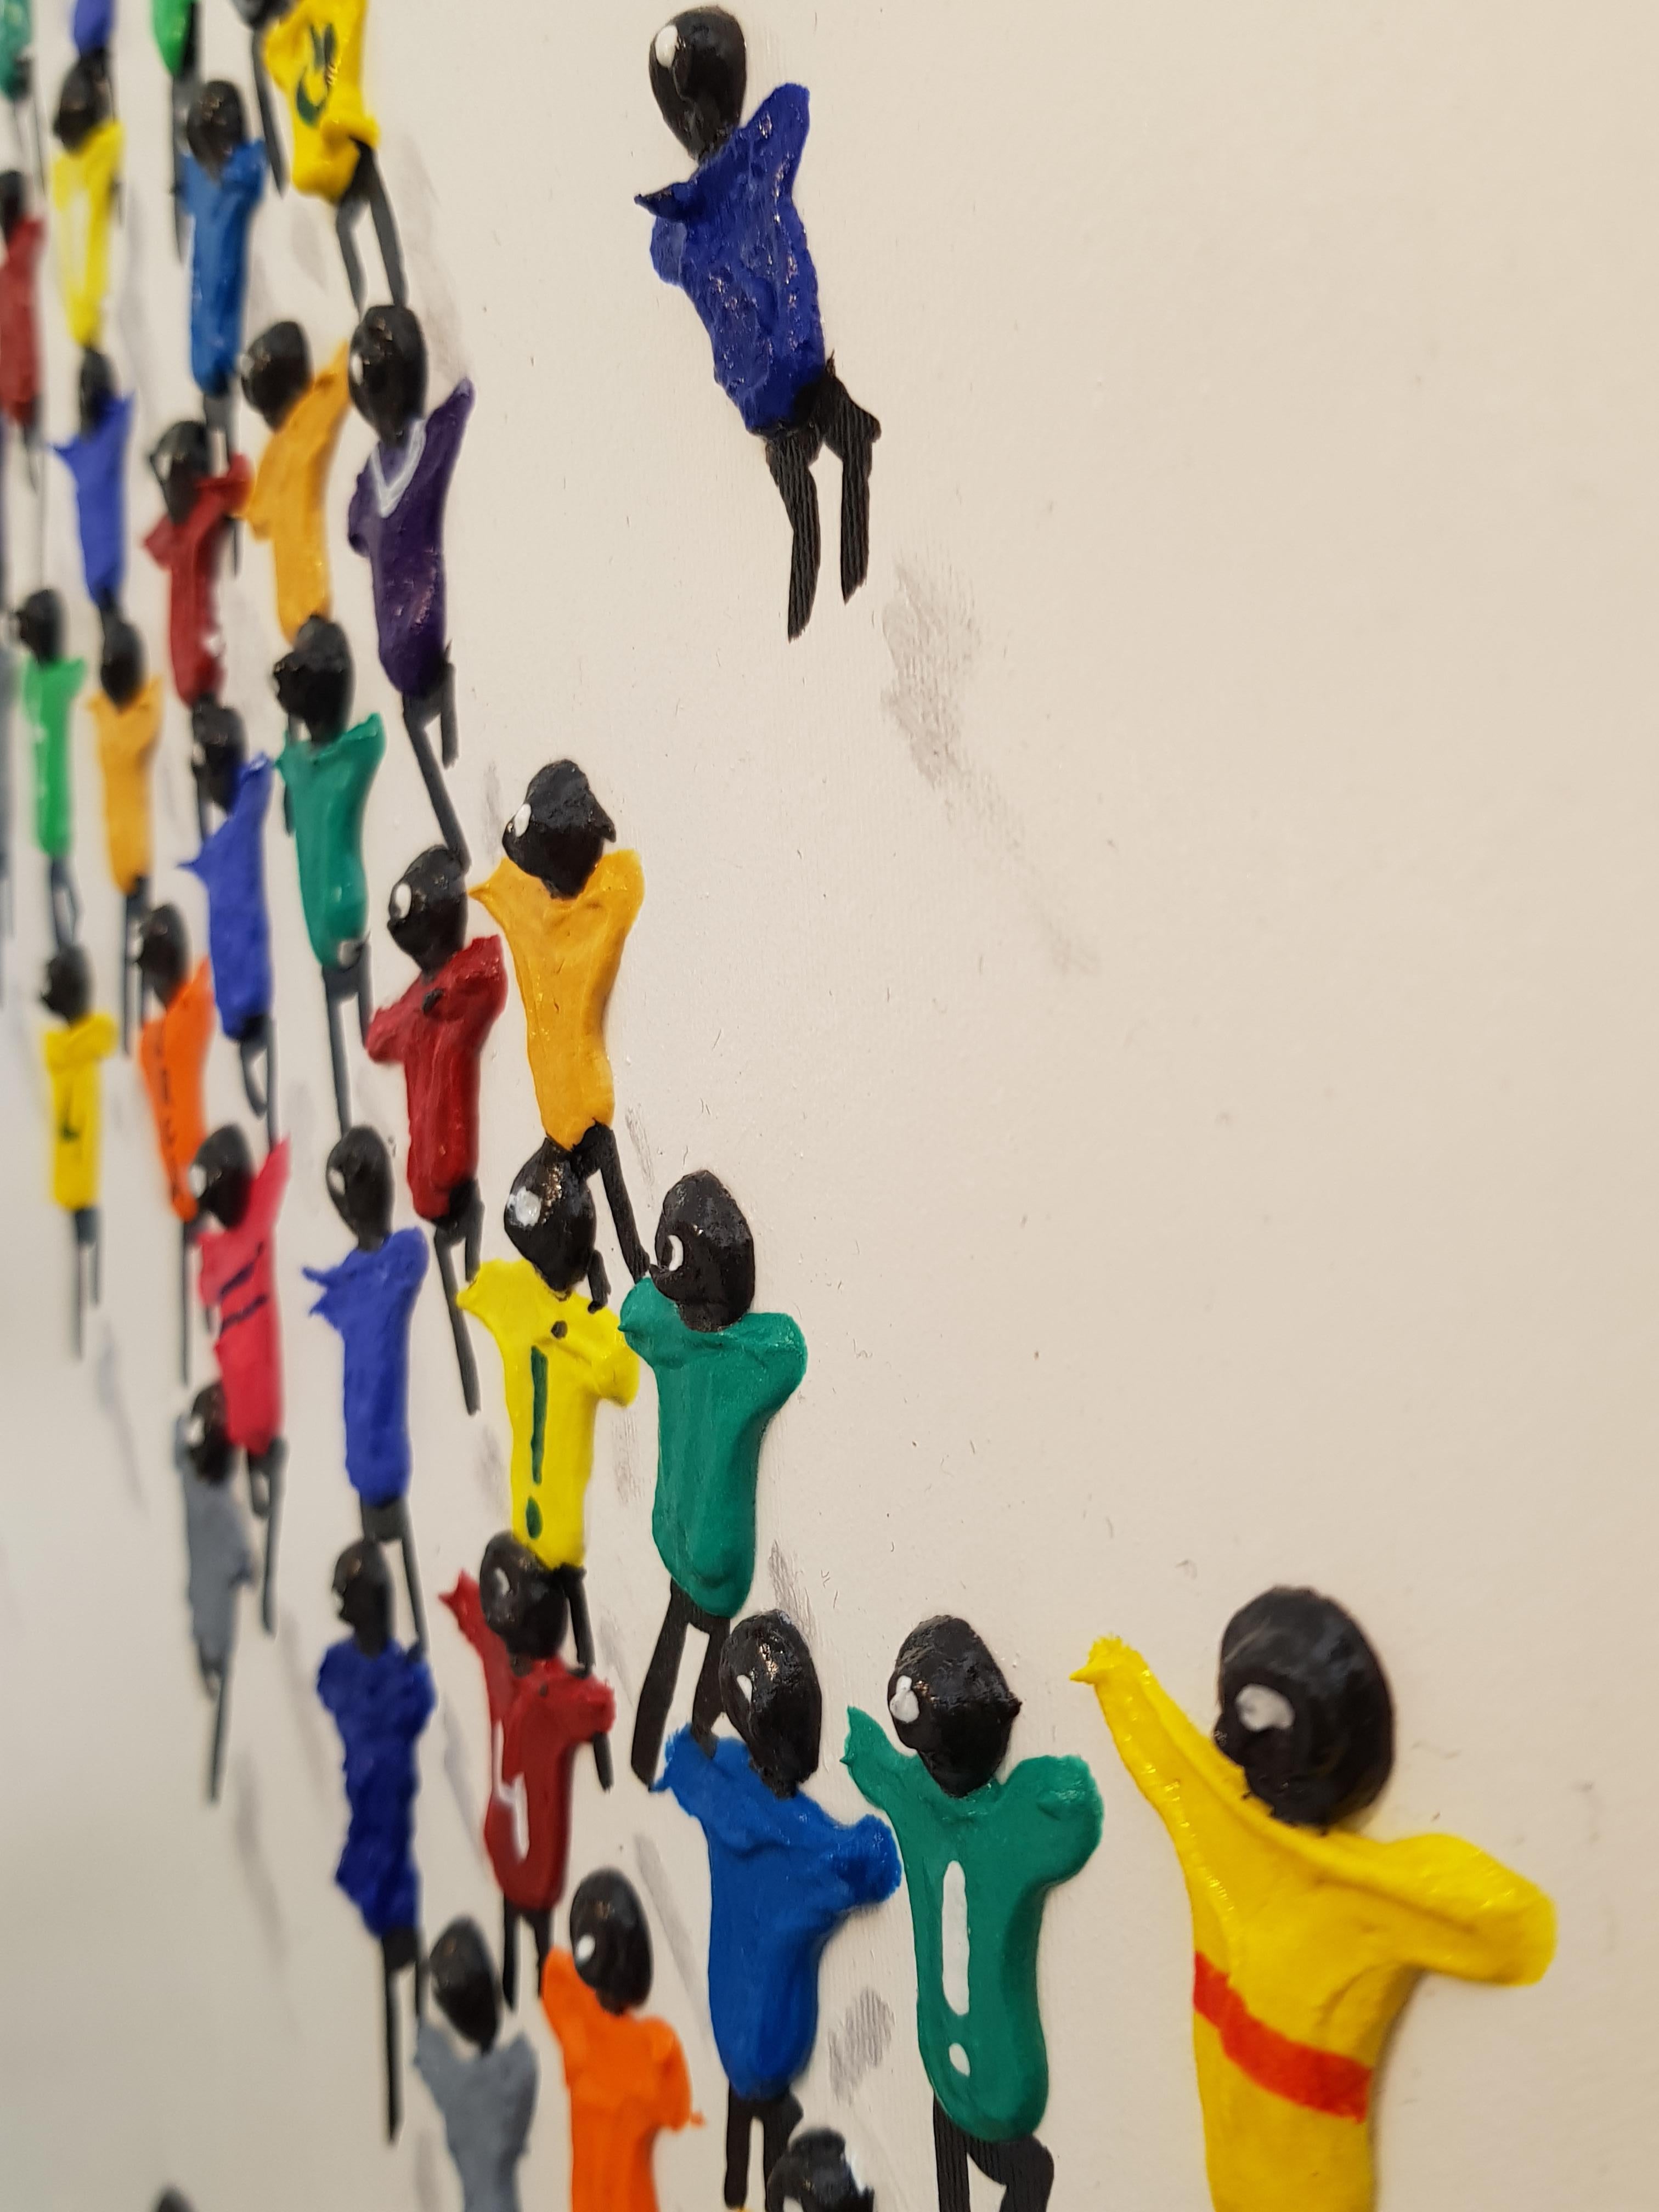 'All Together Now' is a fun and vibrant piece that just pops off the wall. It is extraordinarily unconventional and sure to inspire conversation. 'All Together Now' is part of a series of works inspired by the power and fun of people joining